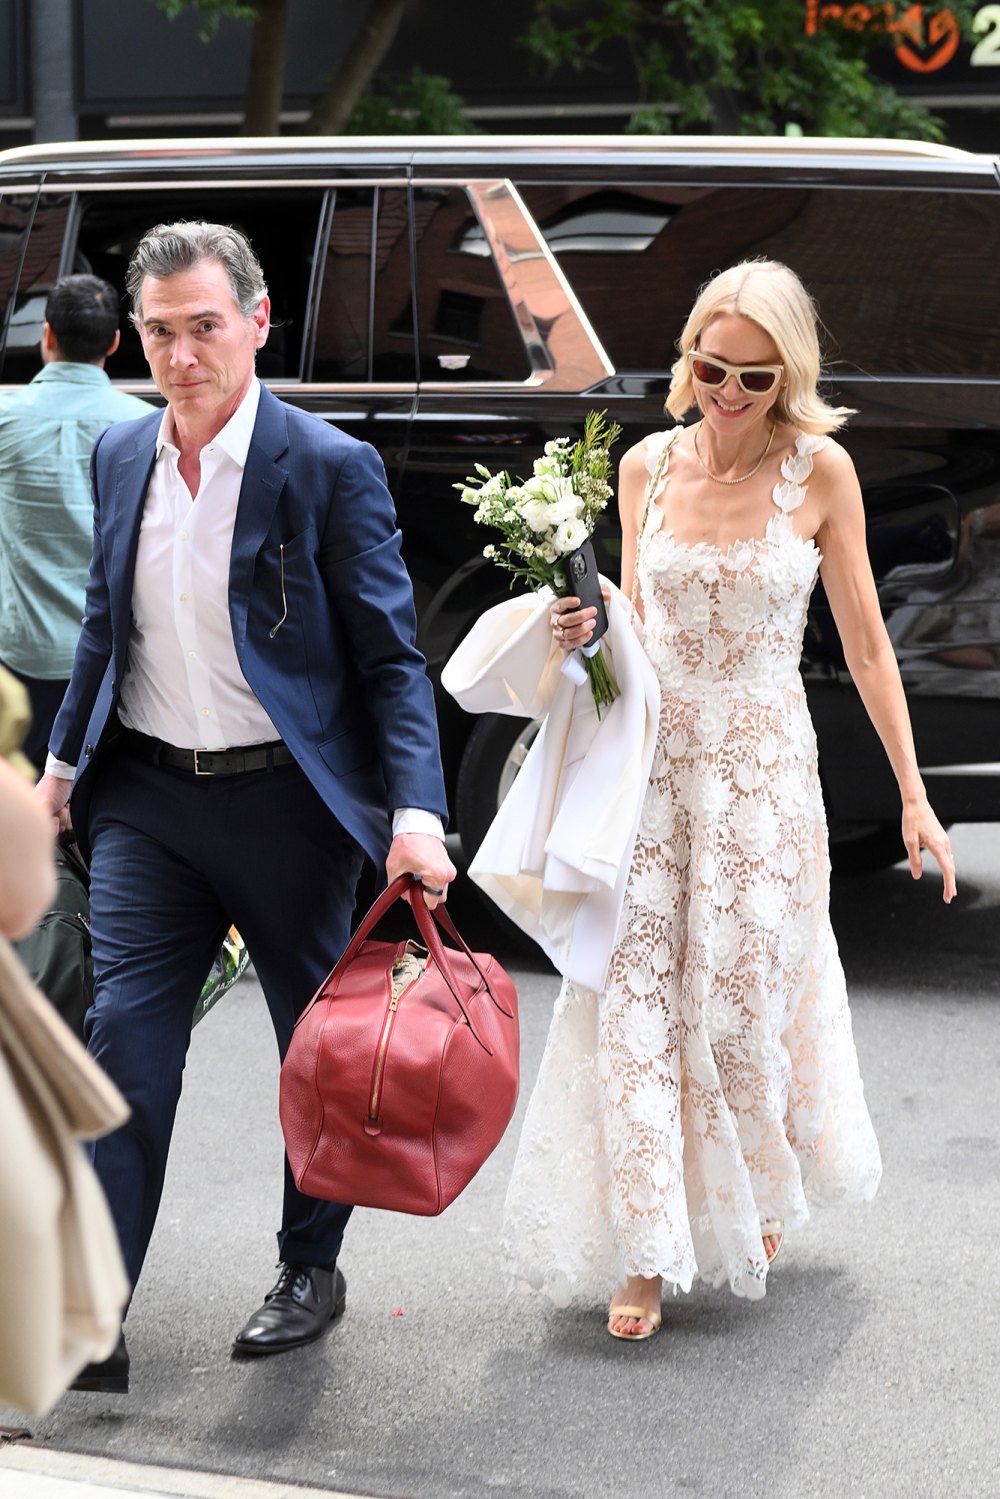 Naomi Watts Marries Billy Crudup Wearing $5K Wedding Dress and Carrying Deli Flowers: Photos